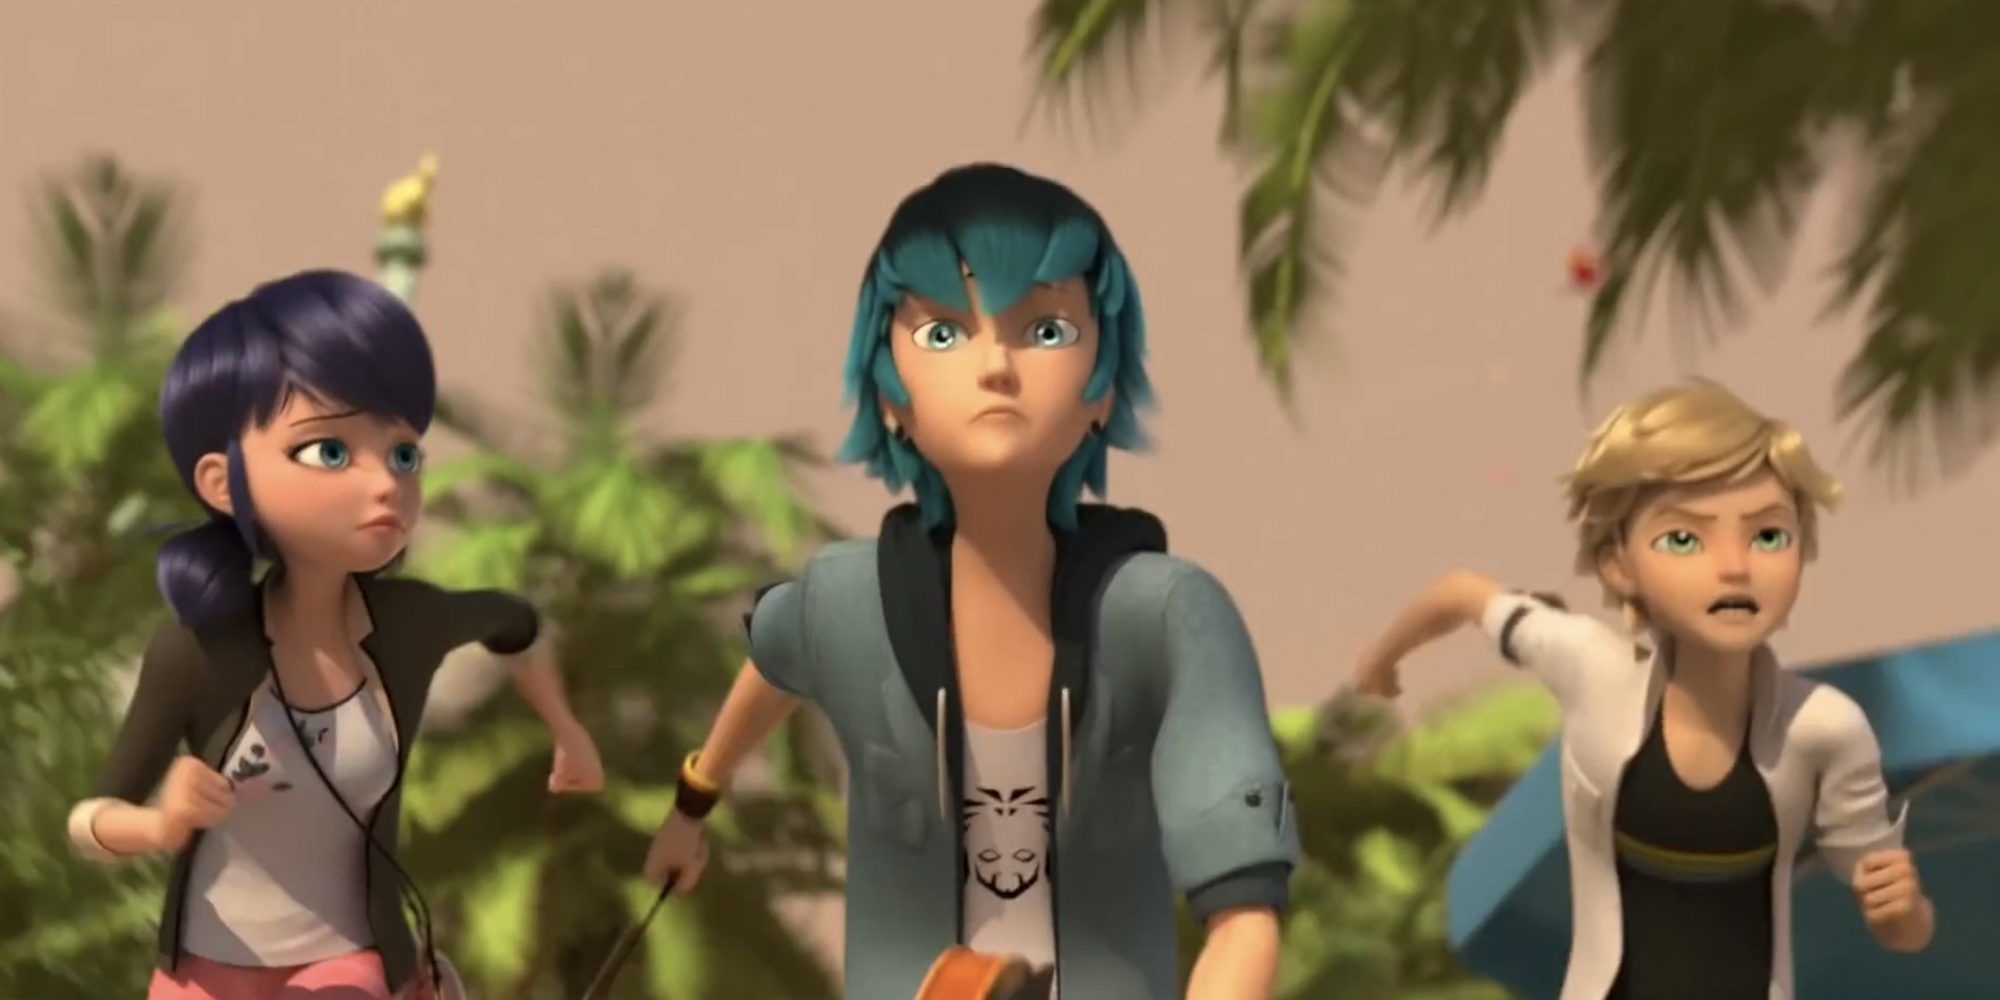 Marinette, Luka, and Adrien on the run in Miraculous Ladybug S4E18 Wishmaker.